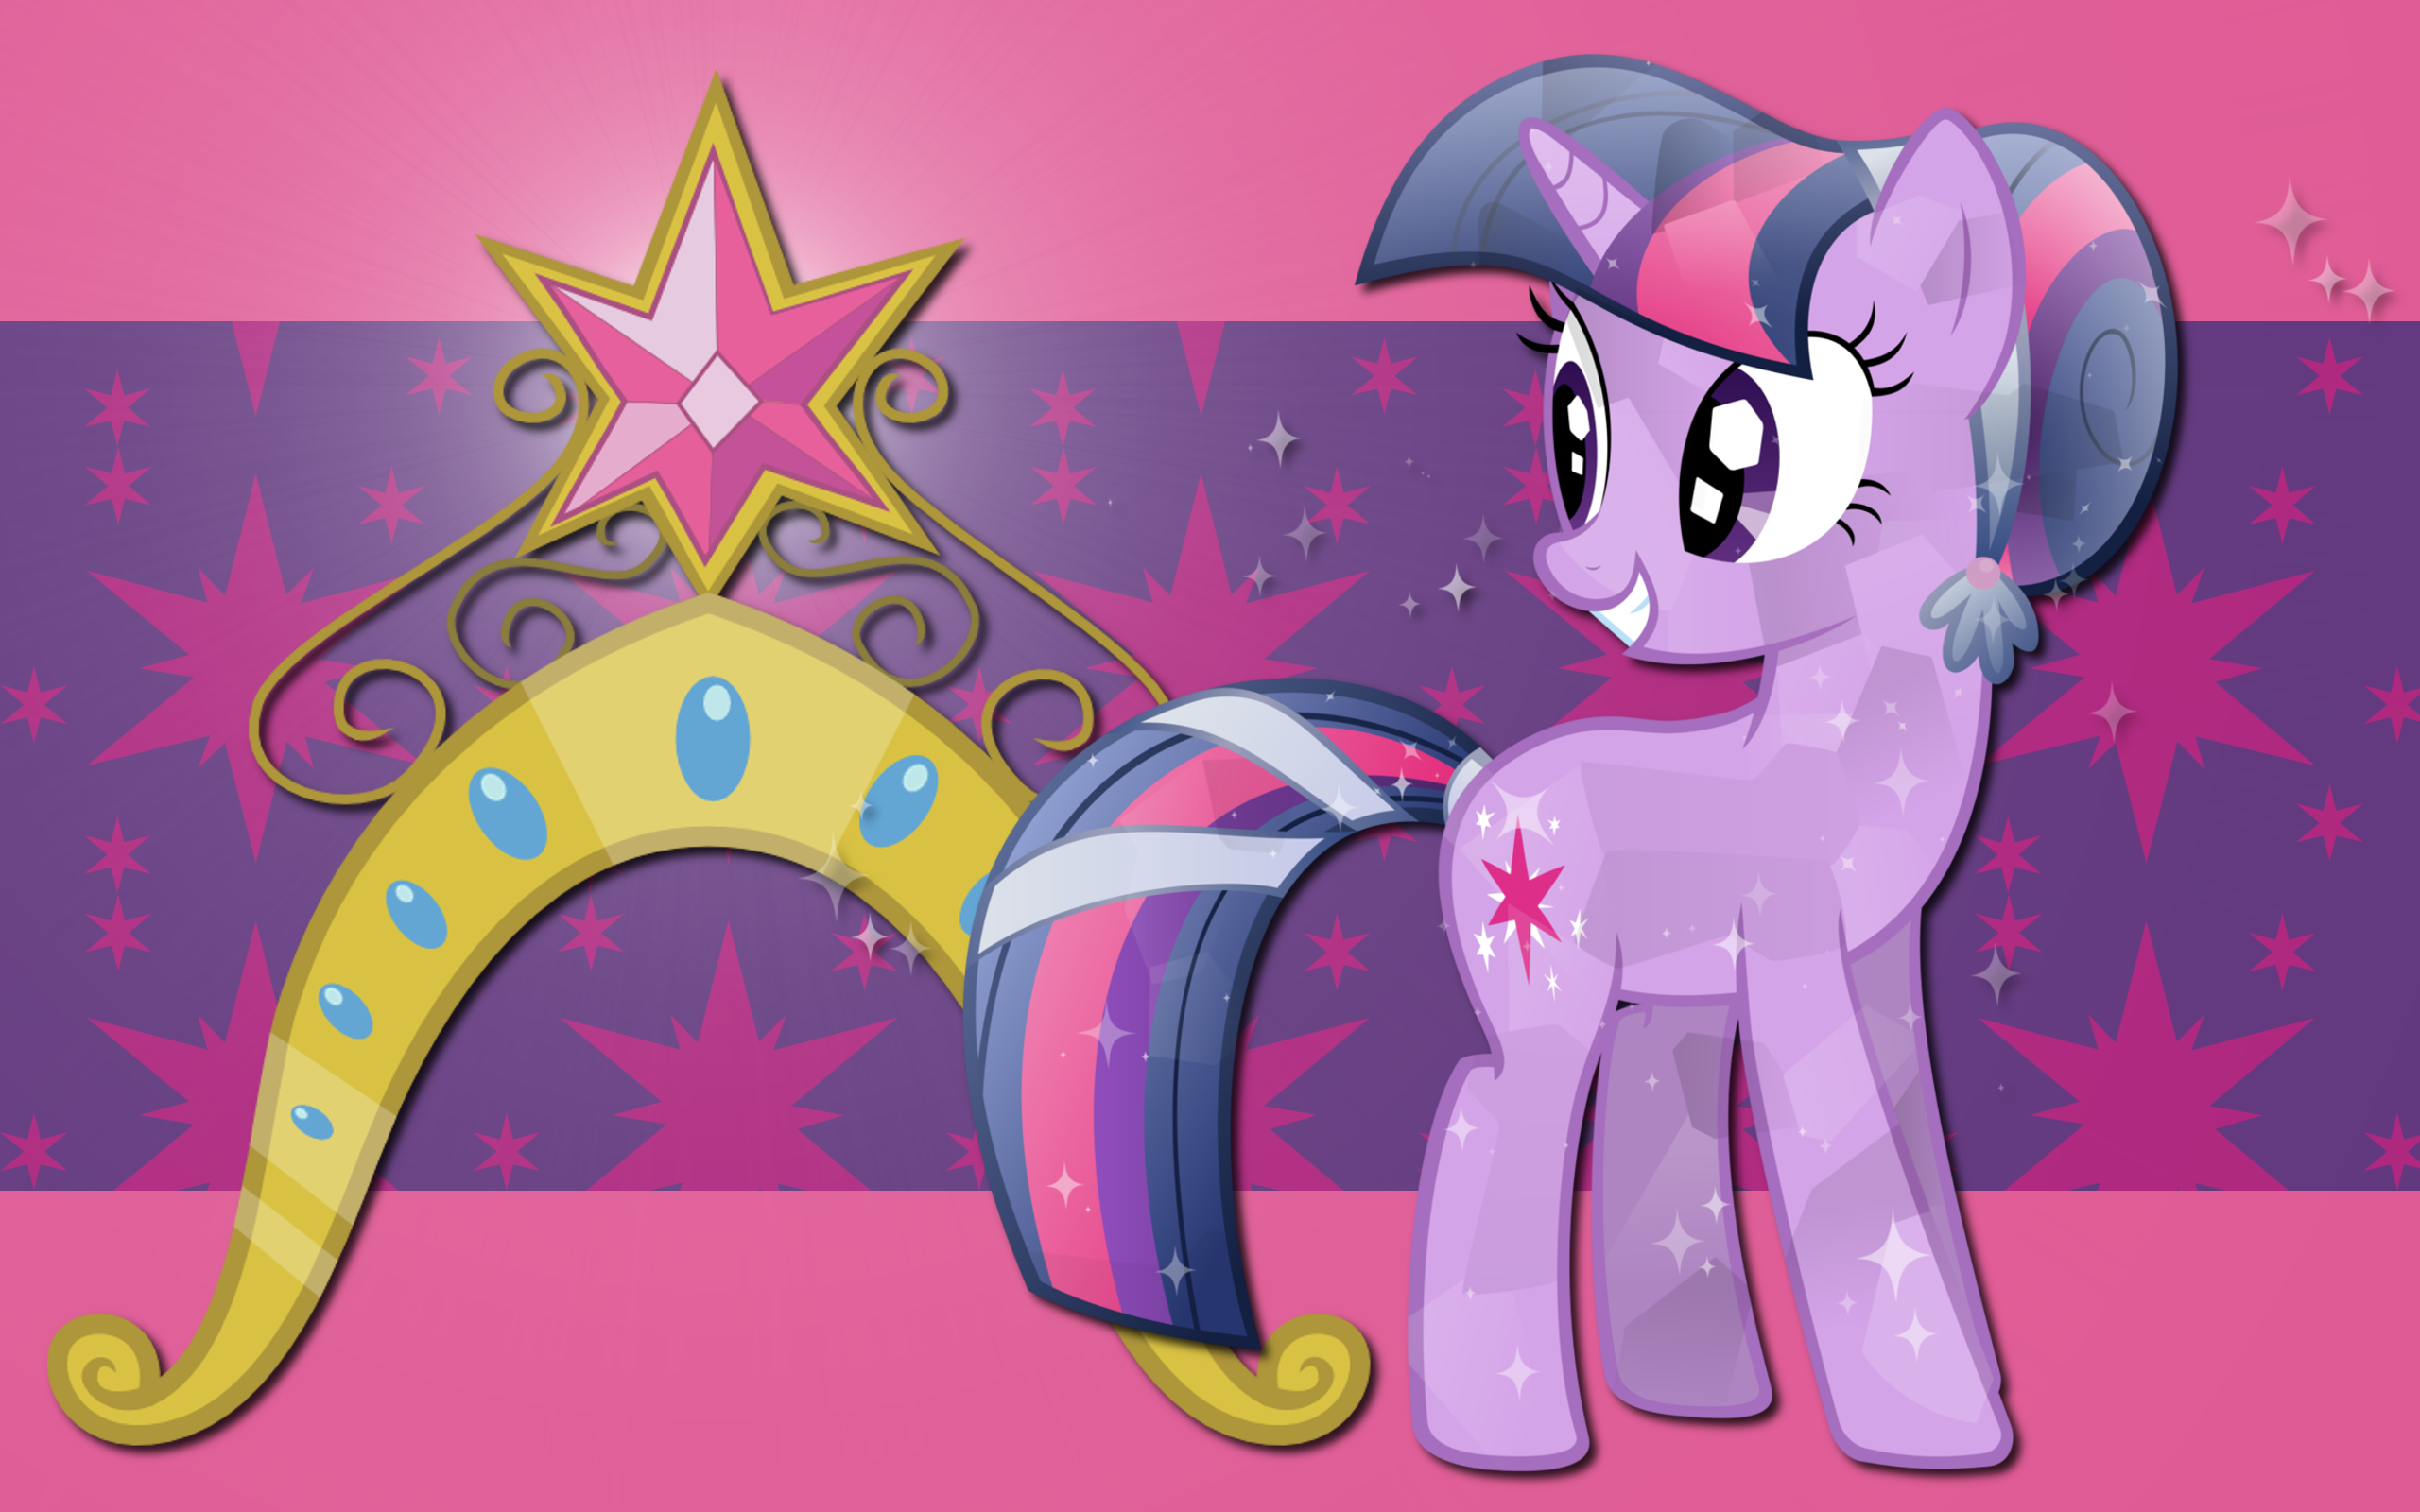 Crystal Twilight WP by AliceHumanSacrifice0, ooklah, pageturner1988 and Pony-Vectors